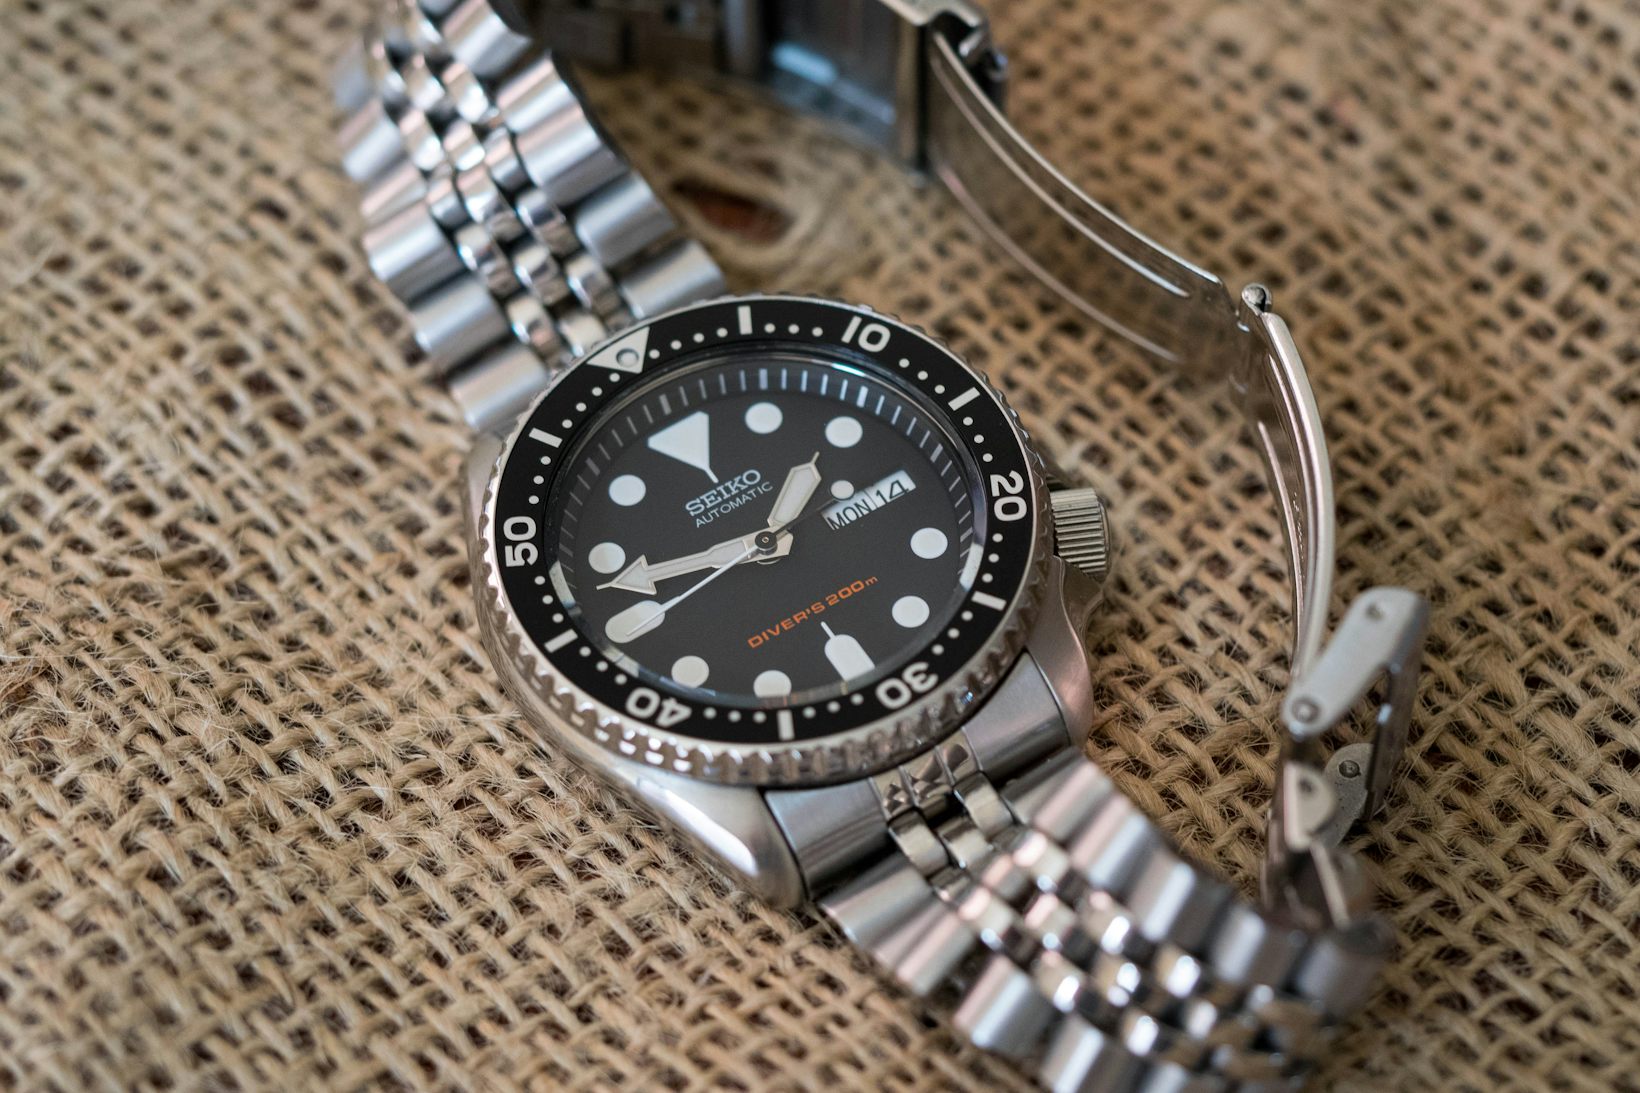 The SKX007 King of value-packed dive